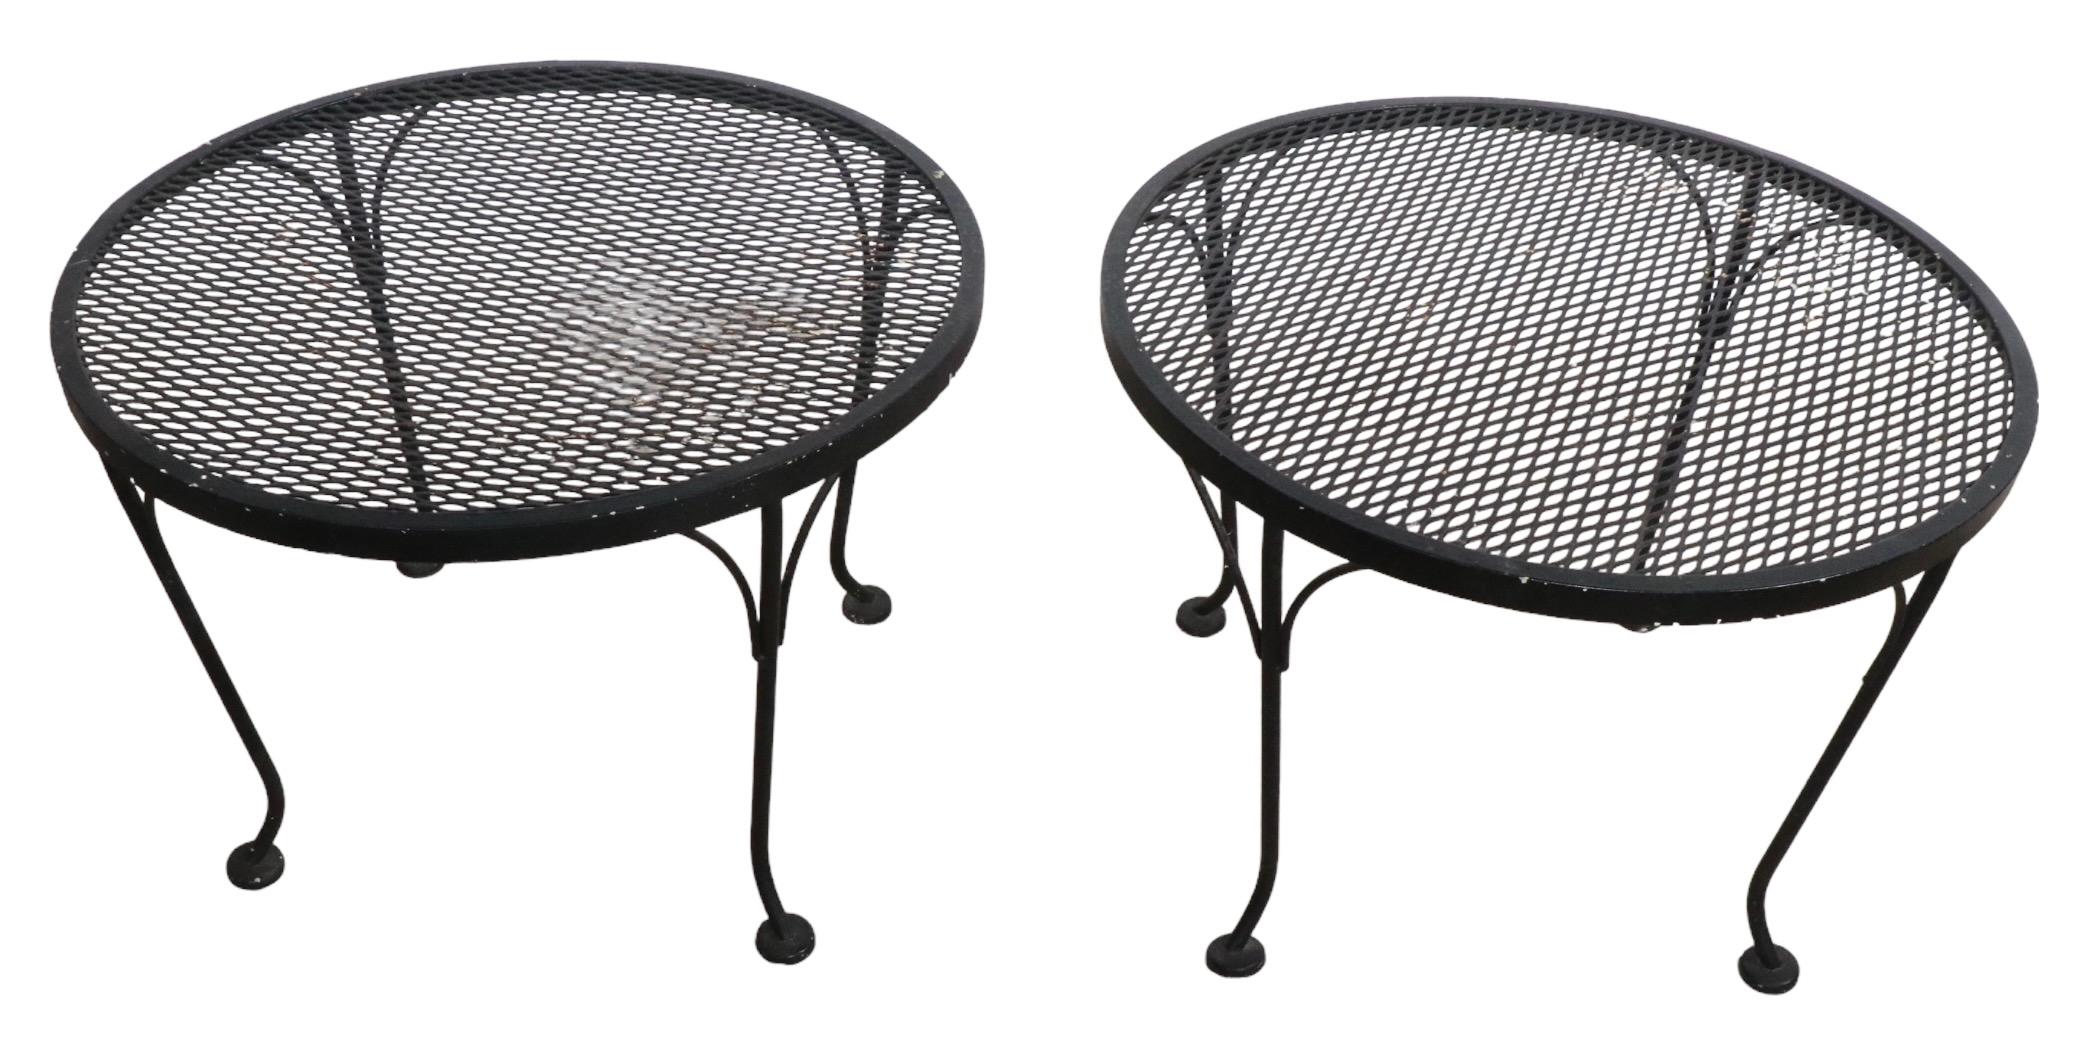 Wrought Iron and Metal Mesh Garden Patio Poolside Side Tables by Woodard 5